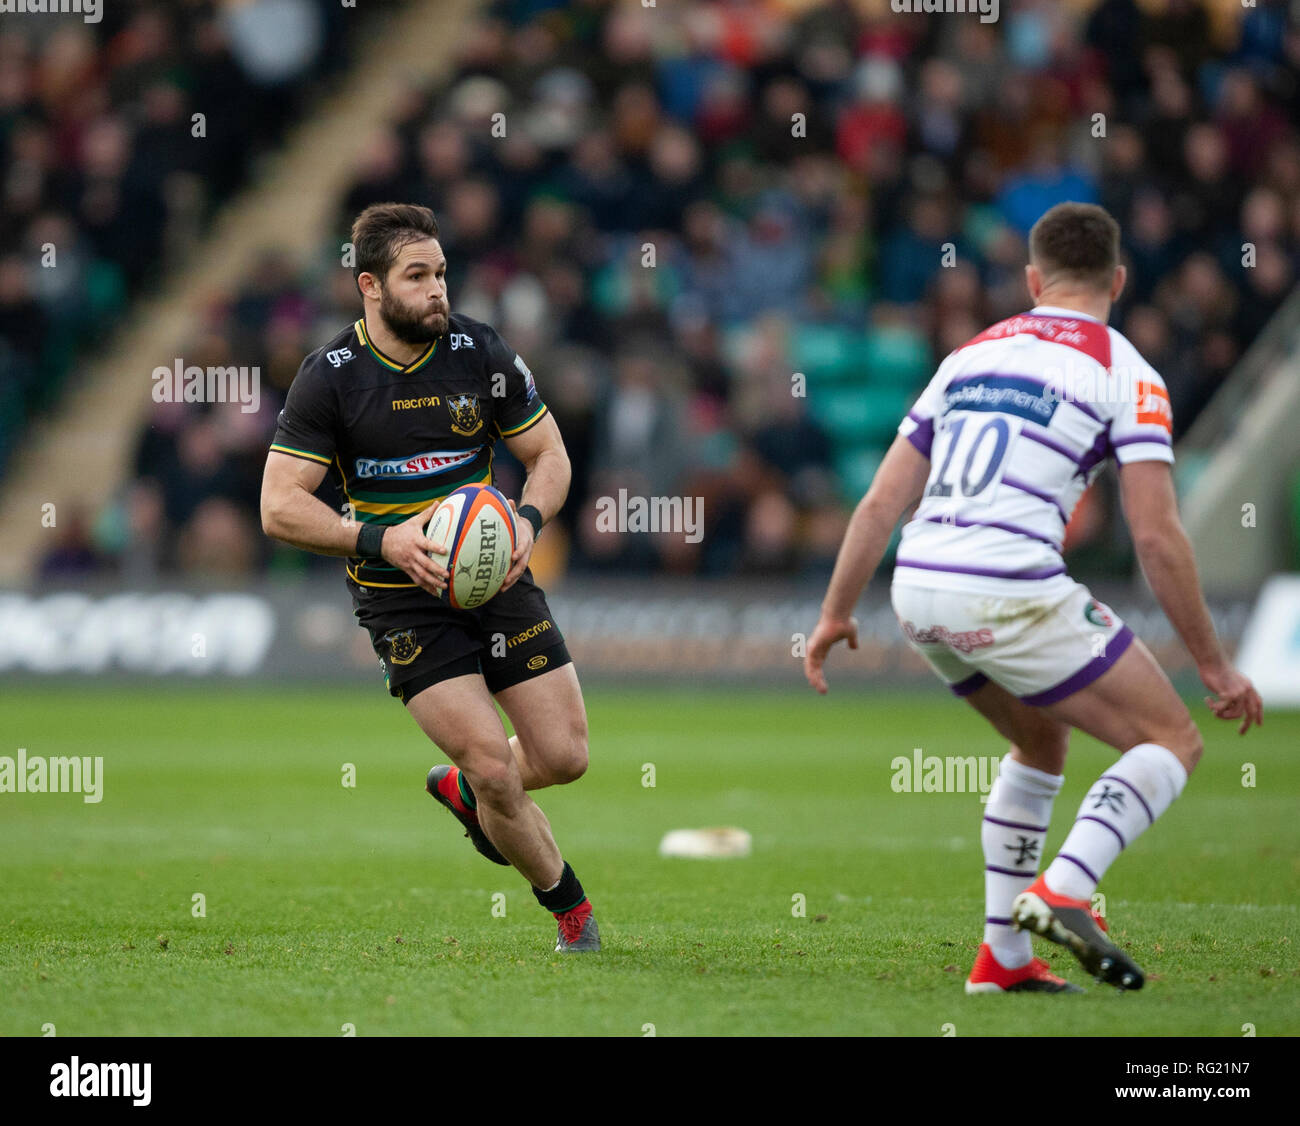 Northampton, UK. 26th January 2019. Cobus Reinach of Northampton Saints runs with the ball during the Premiership Rugby Cup match between Northampton Saints and Leicester Tigers. Andrew Taylor/Alamy Live News Stock Photo